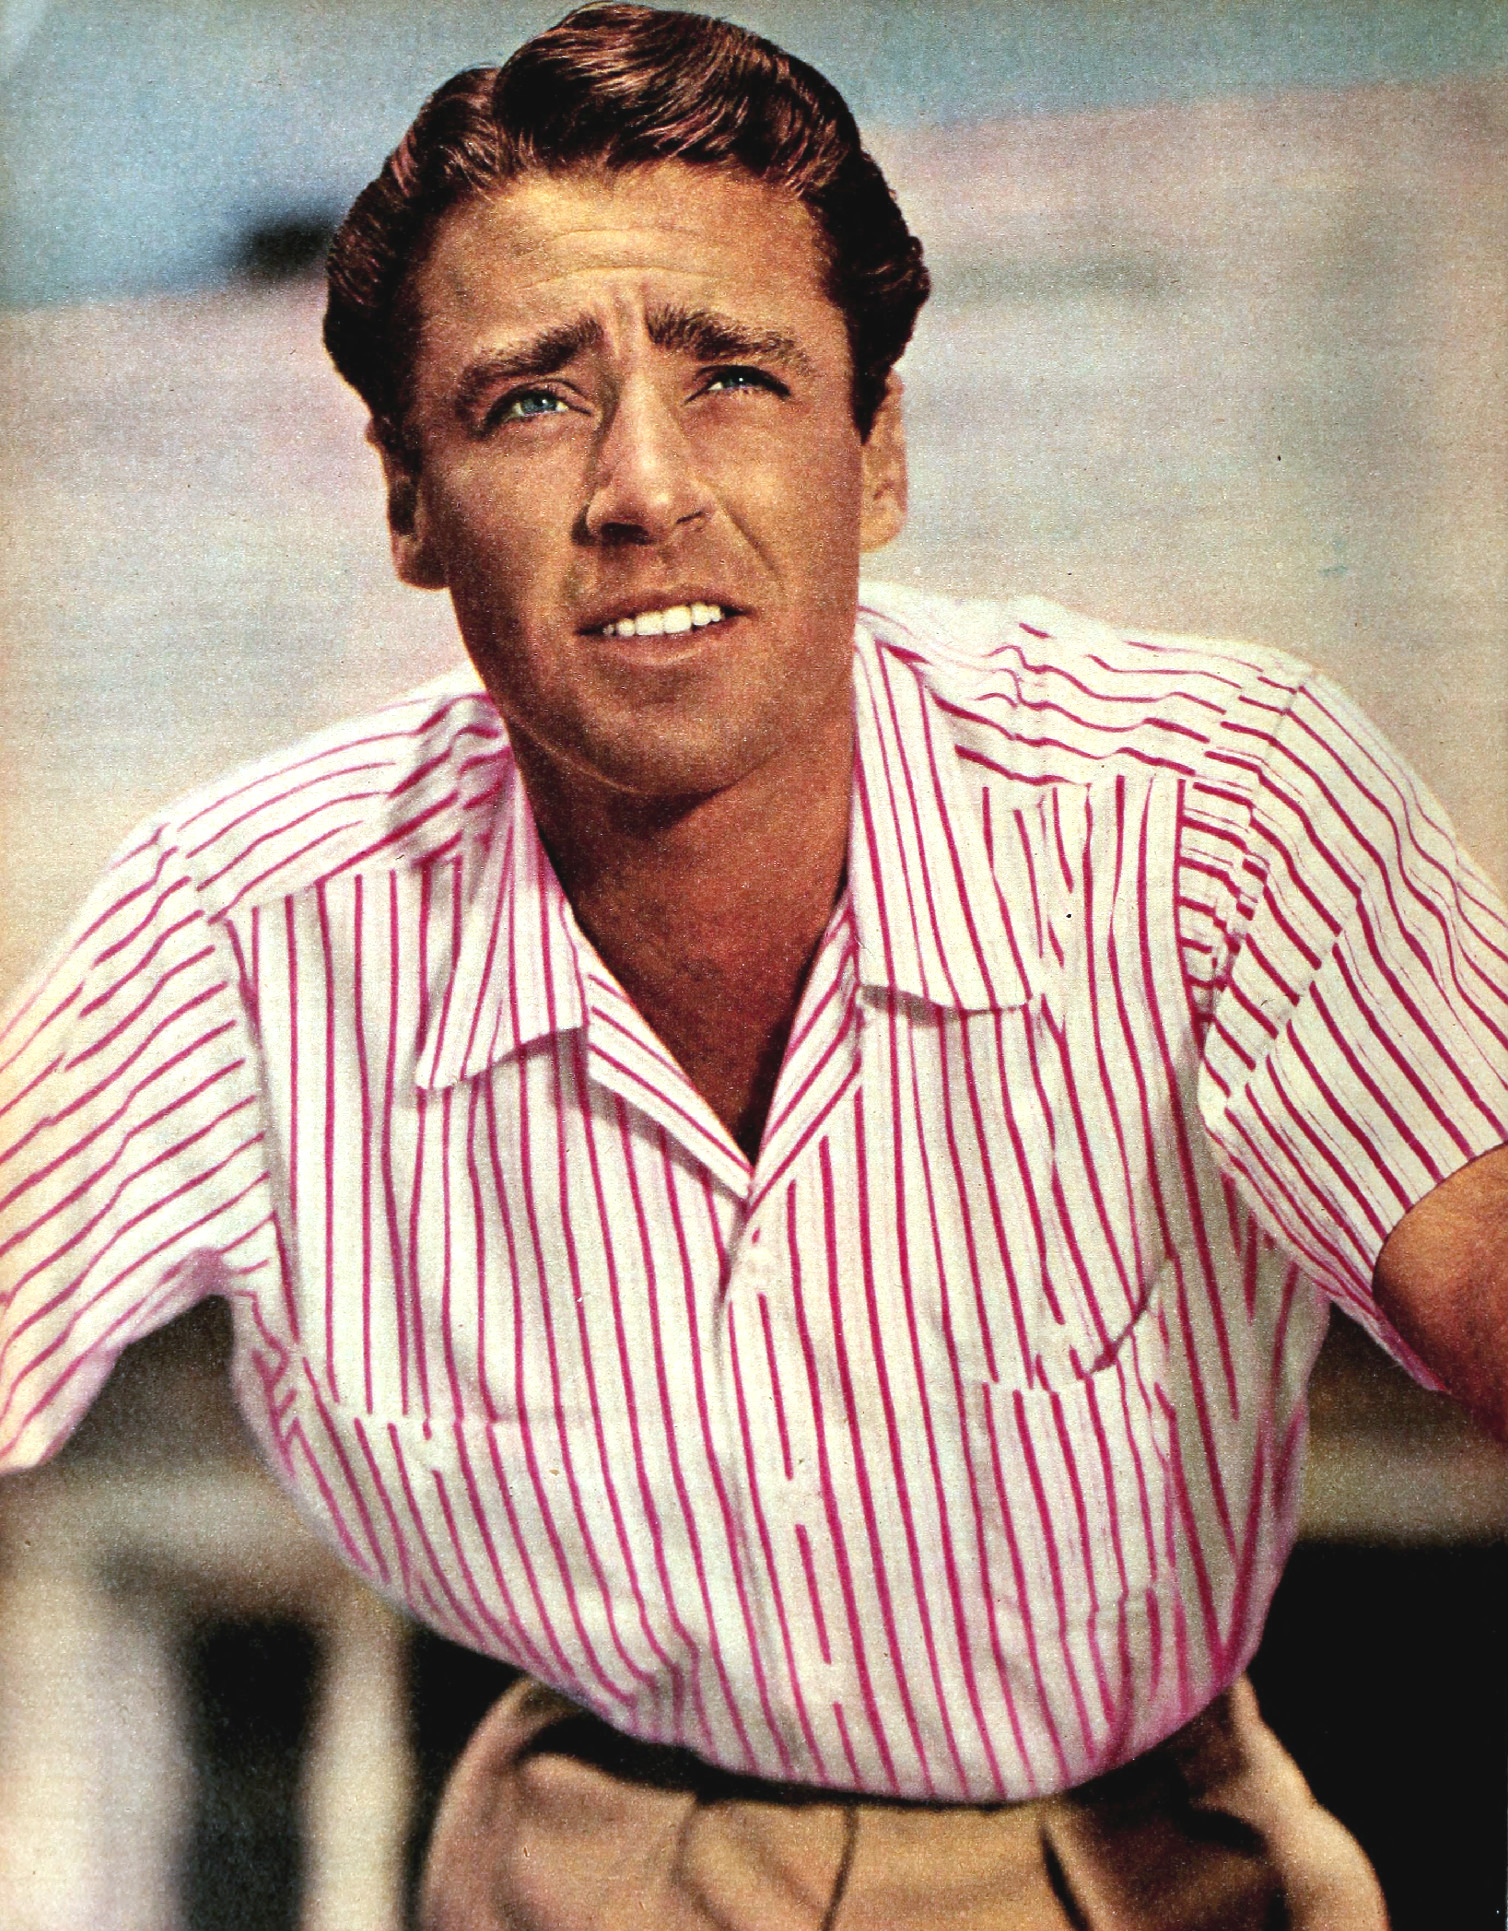 How tall is Peter Lawford?